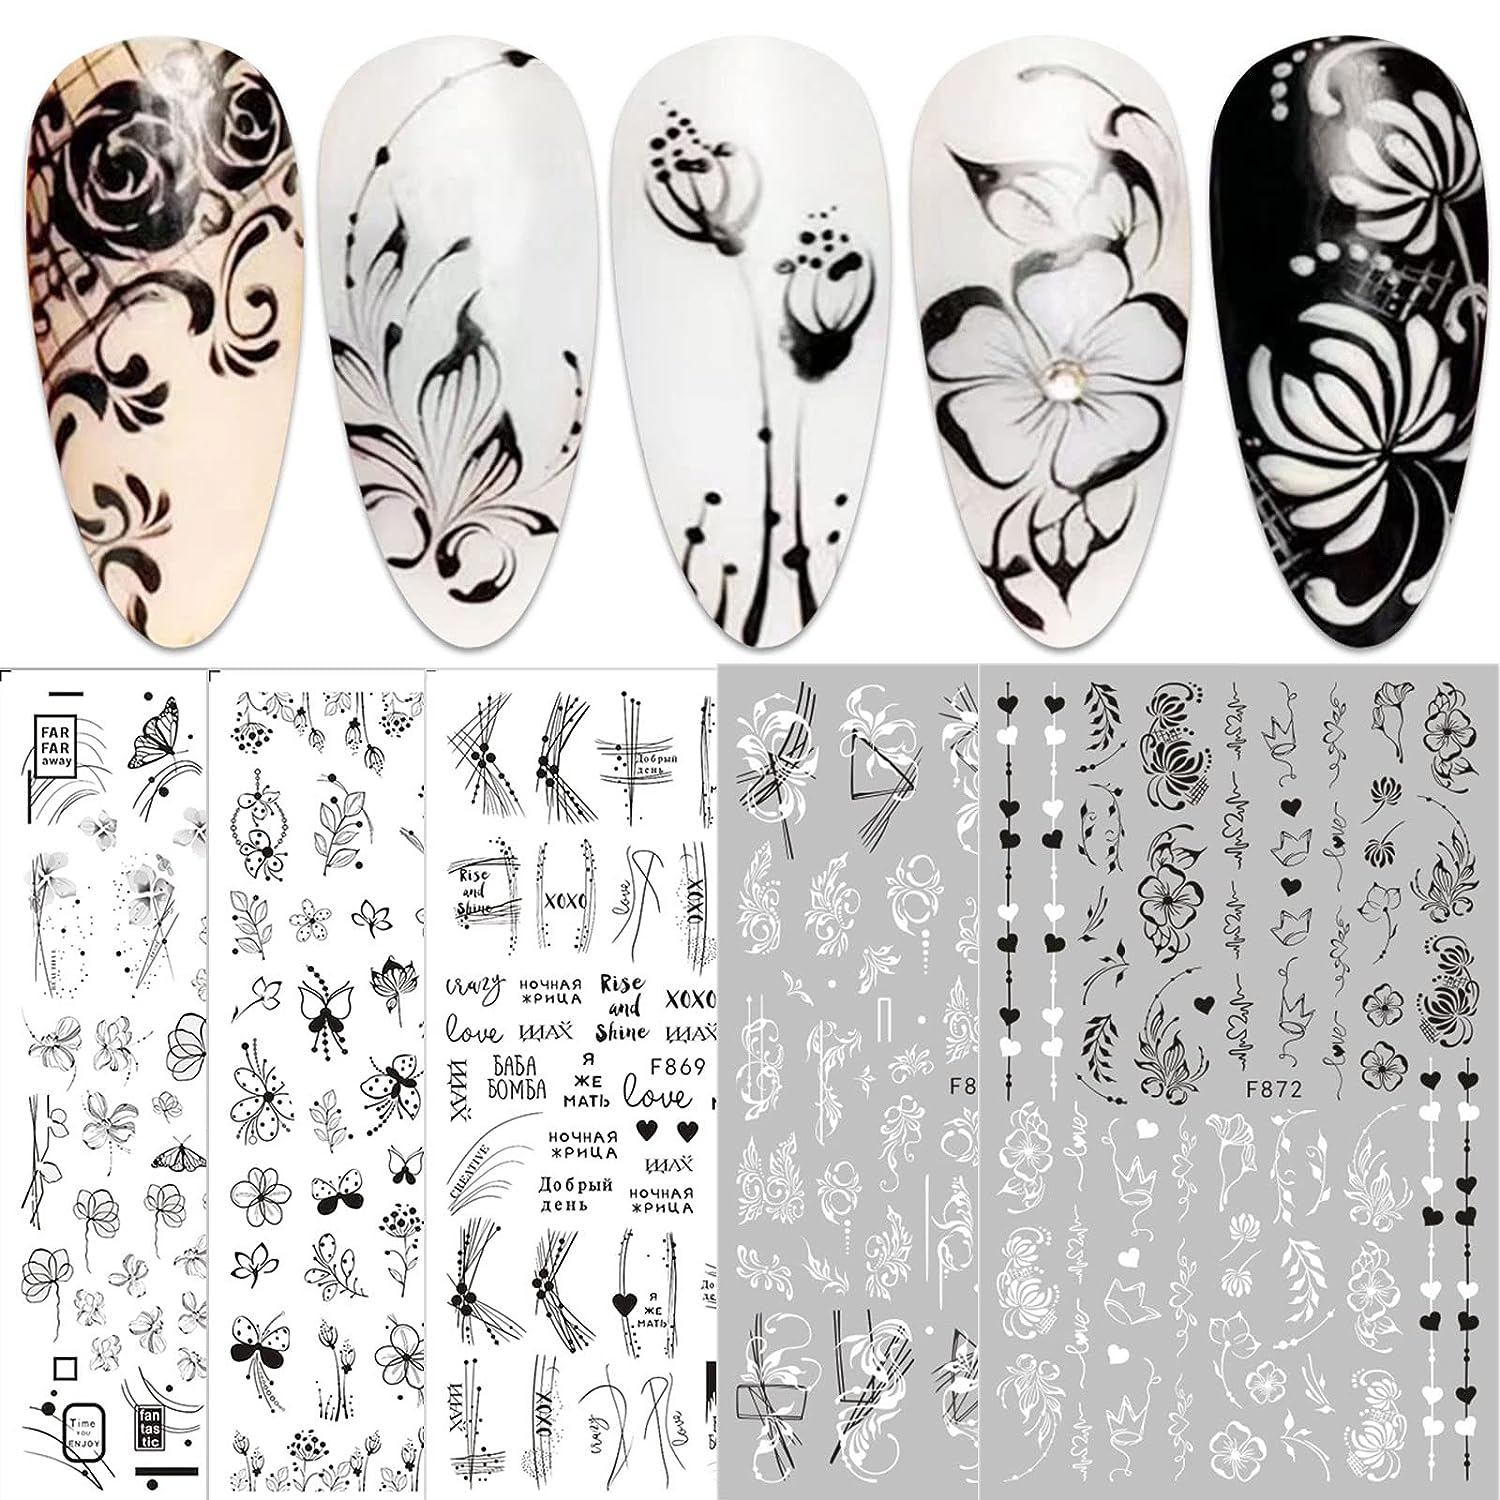 

10 Sheets, Spring Flower Butterfly Nail Art Stickers, Self Adhesive Black White Blossom Design Nail Art Decals For Diy Or Nail Salons, Nail Art Supplies For Women And Girls